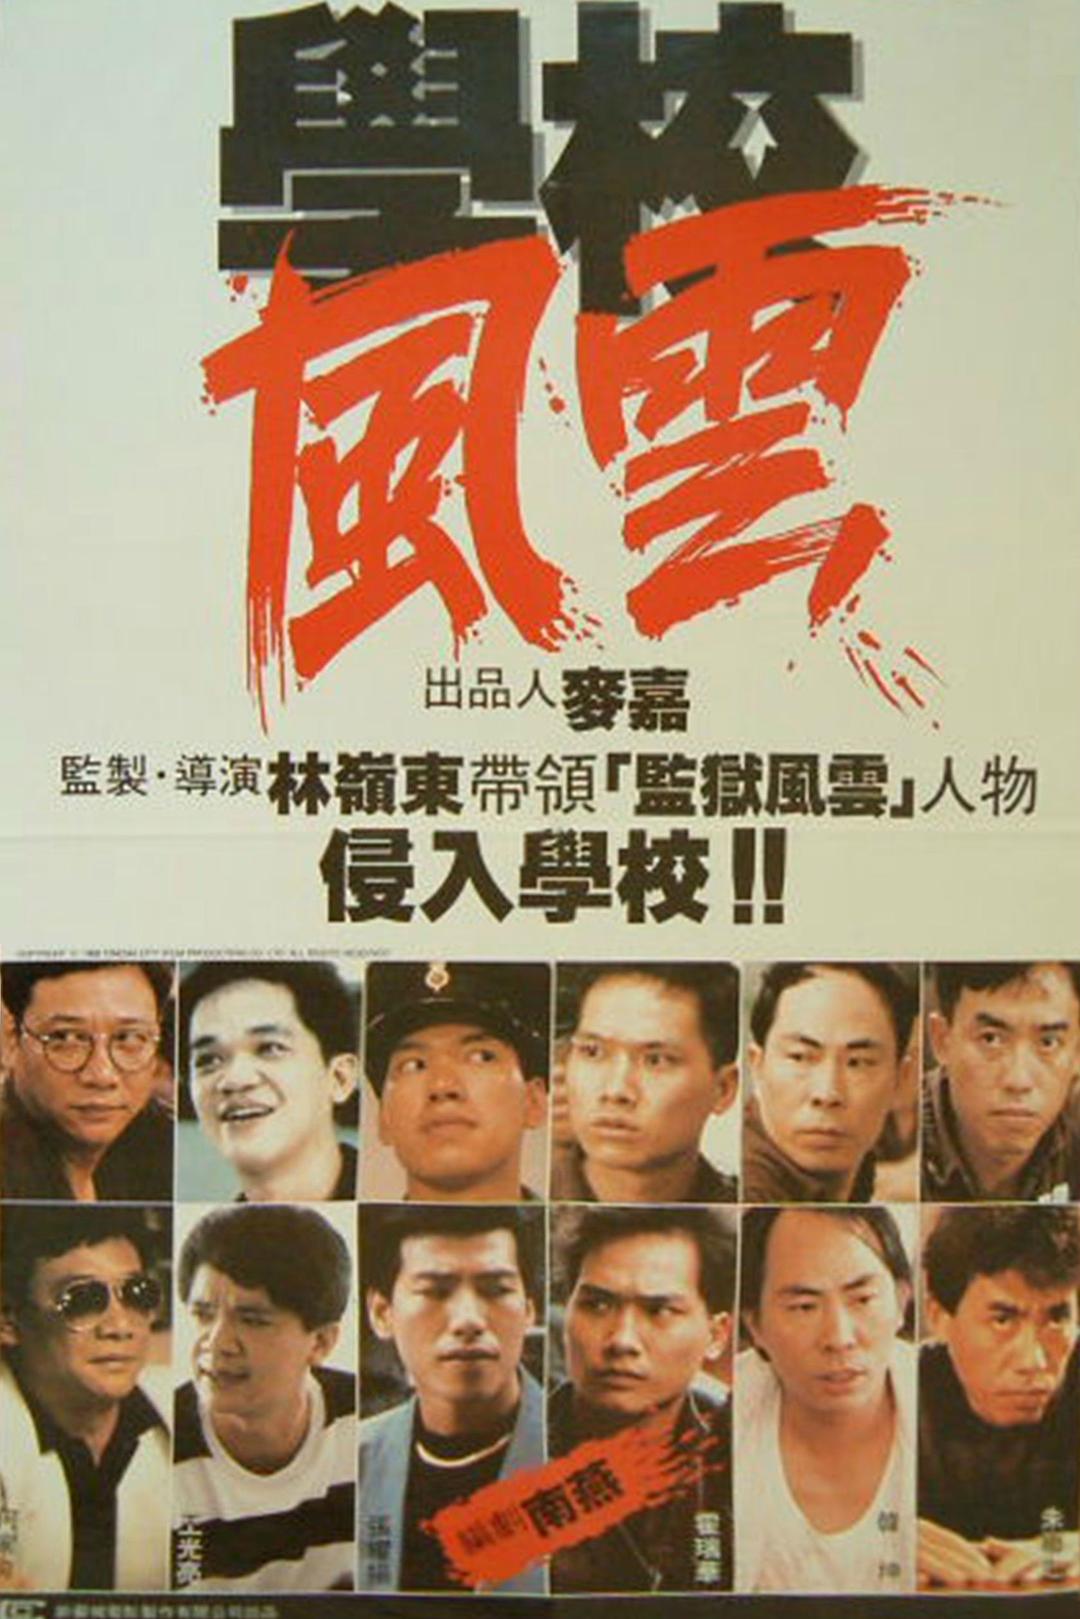 WУL School.On.Fire.1988.CHINESE.1080p.BluRay.x264.DTS-FGT 9.39GB-1.png